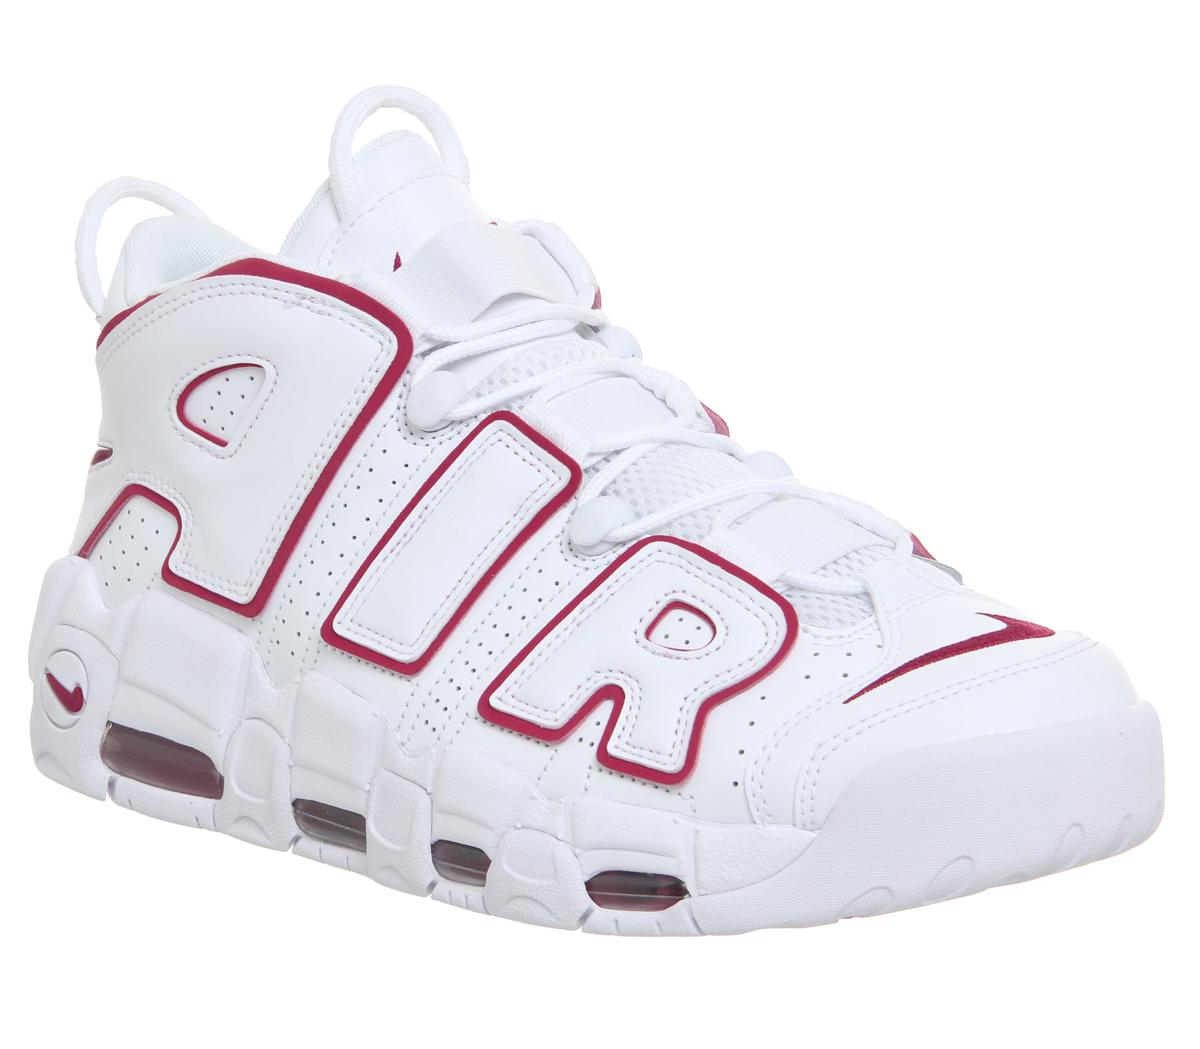 uptempo trainers